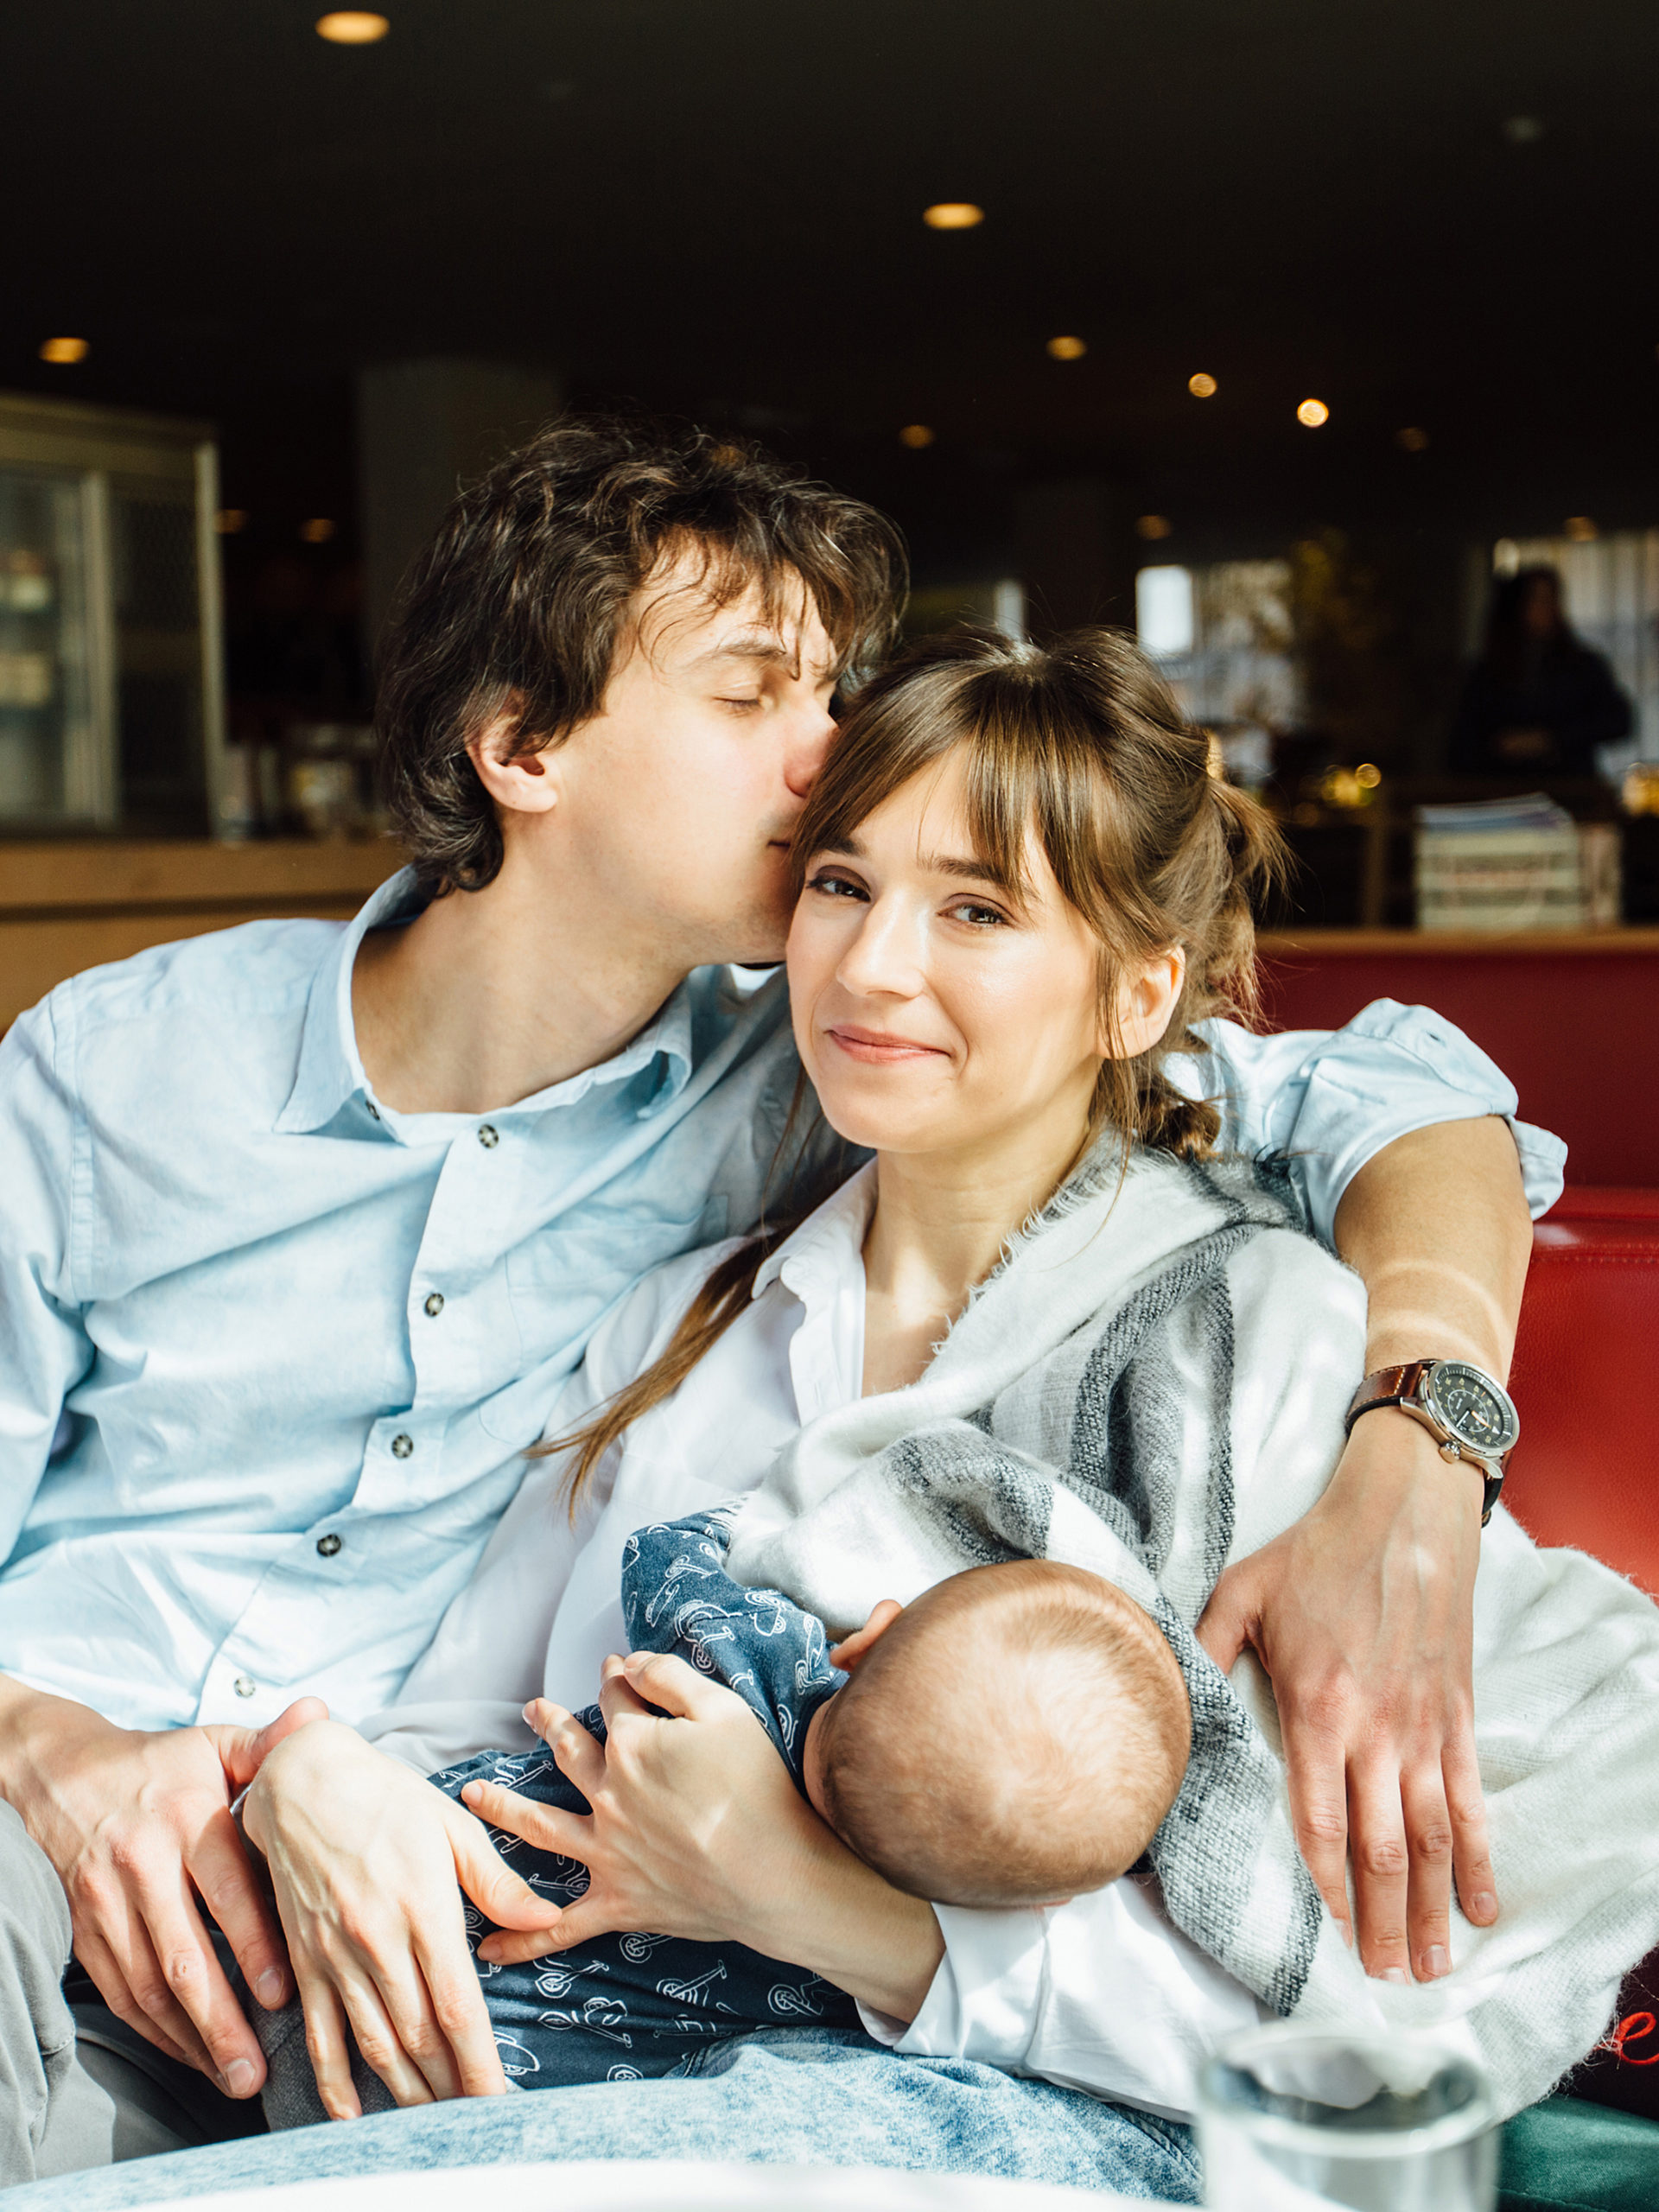 young happy family with husband kissing his wife while she is breast feeding their newborn little son in a restaurant